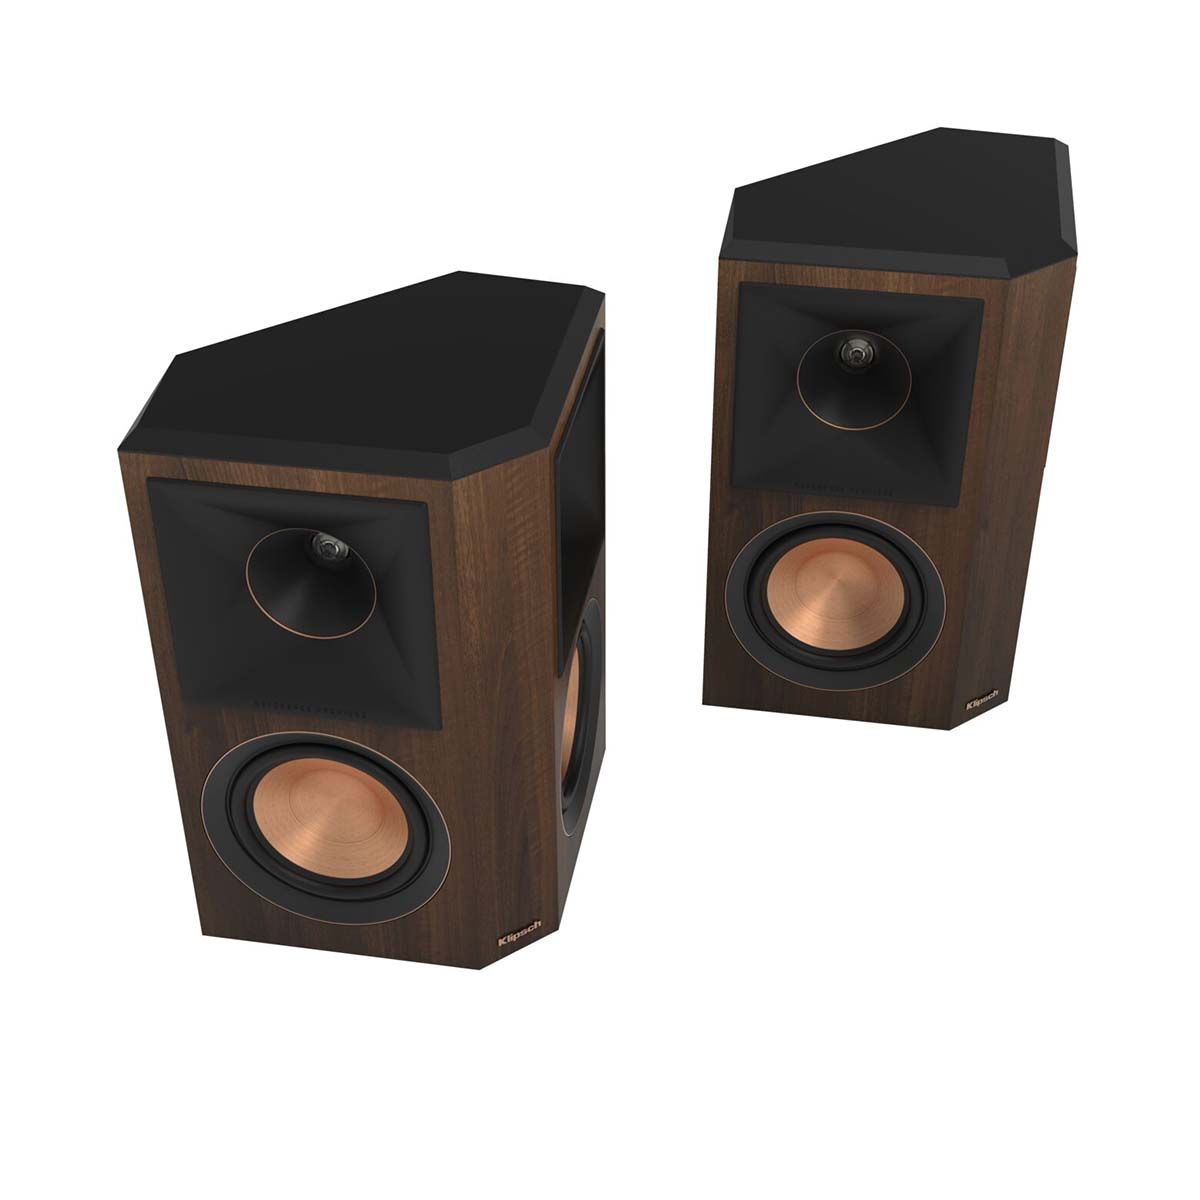 Klipsch RP-502S II Surround Speakers - Walnut - angled view of pair without grills